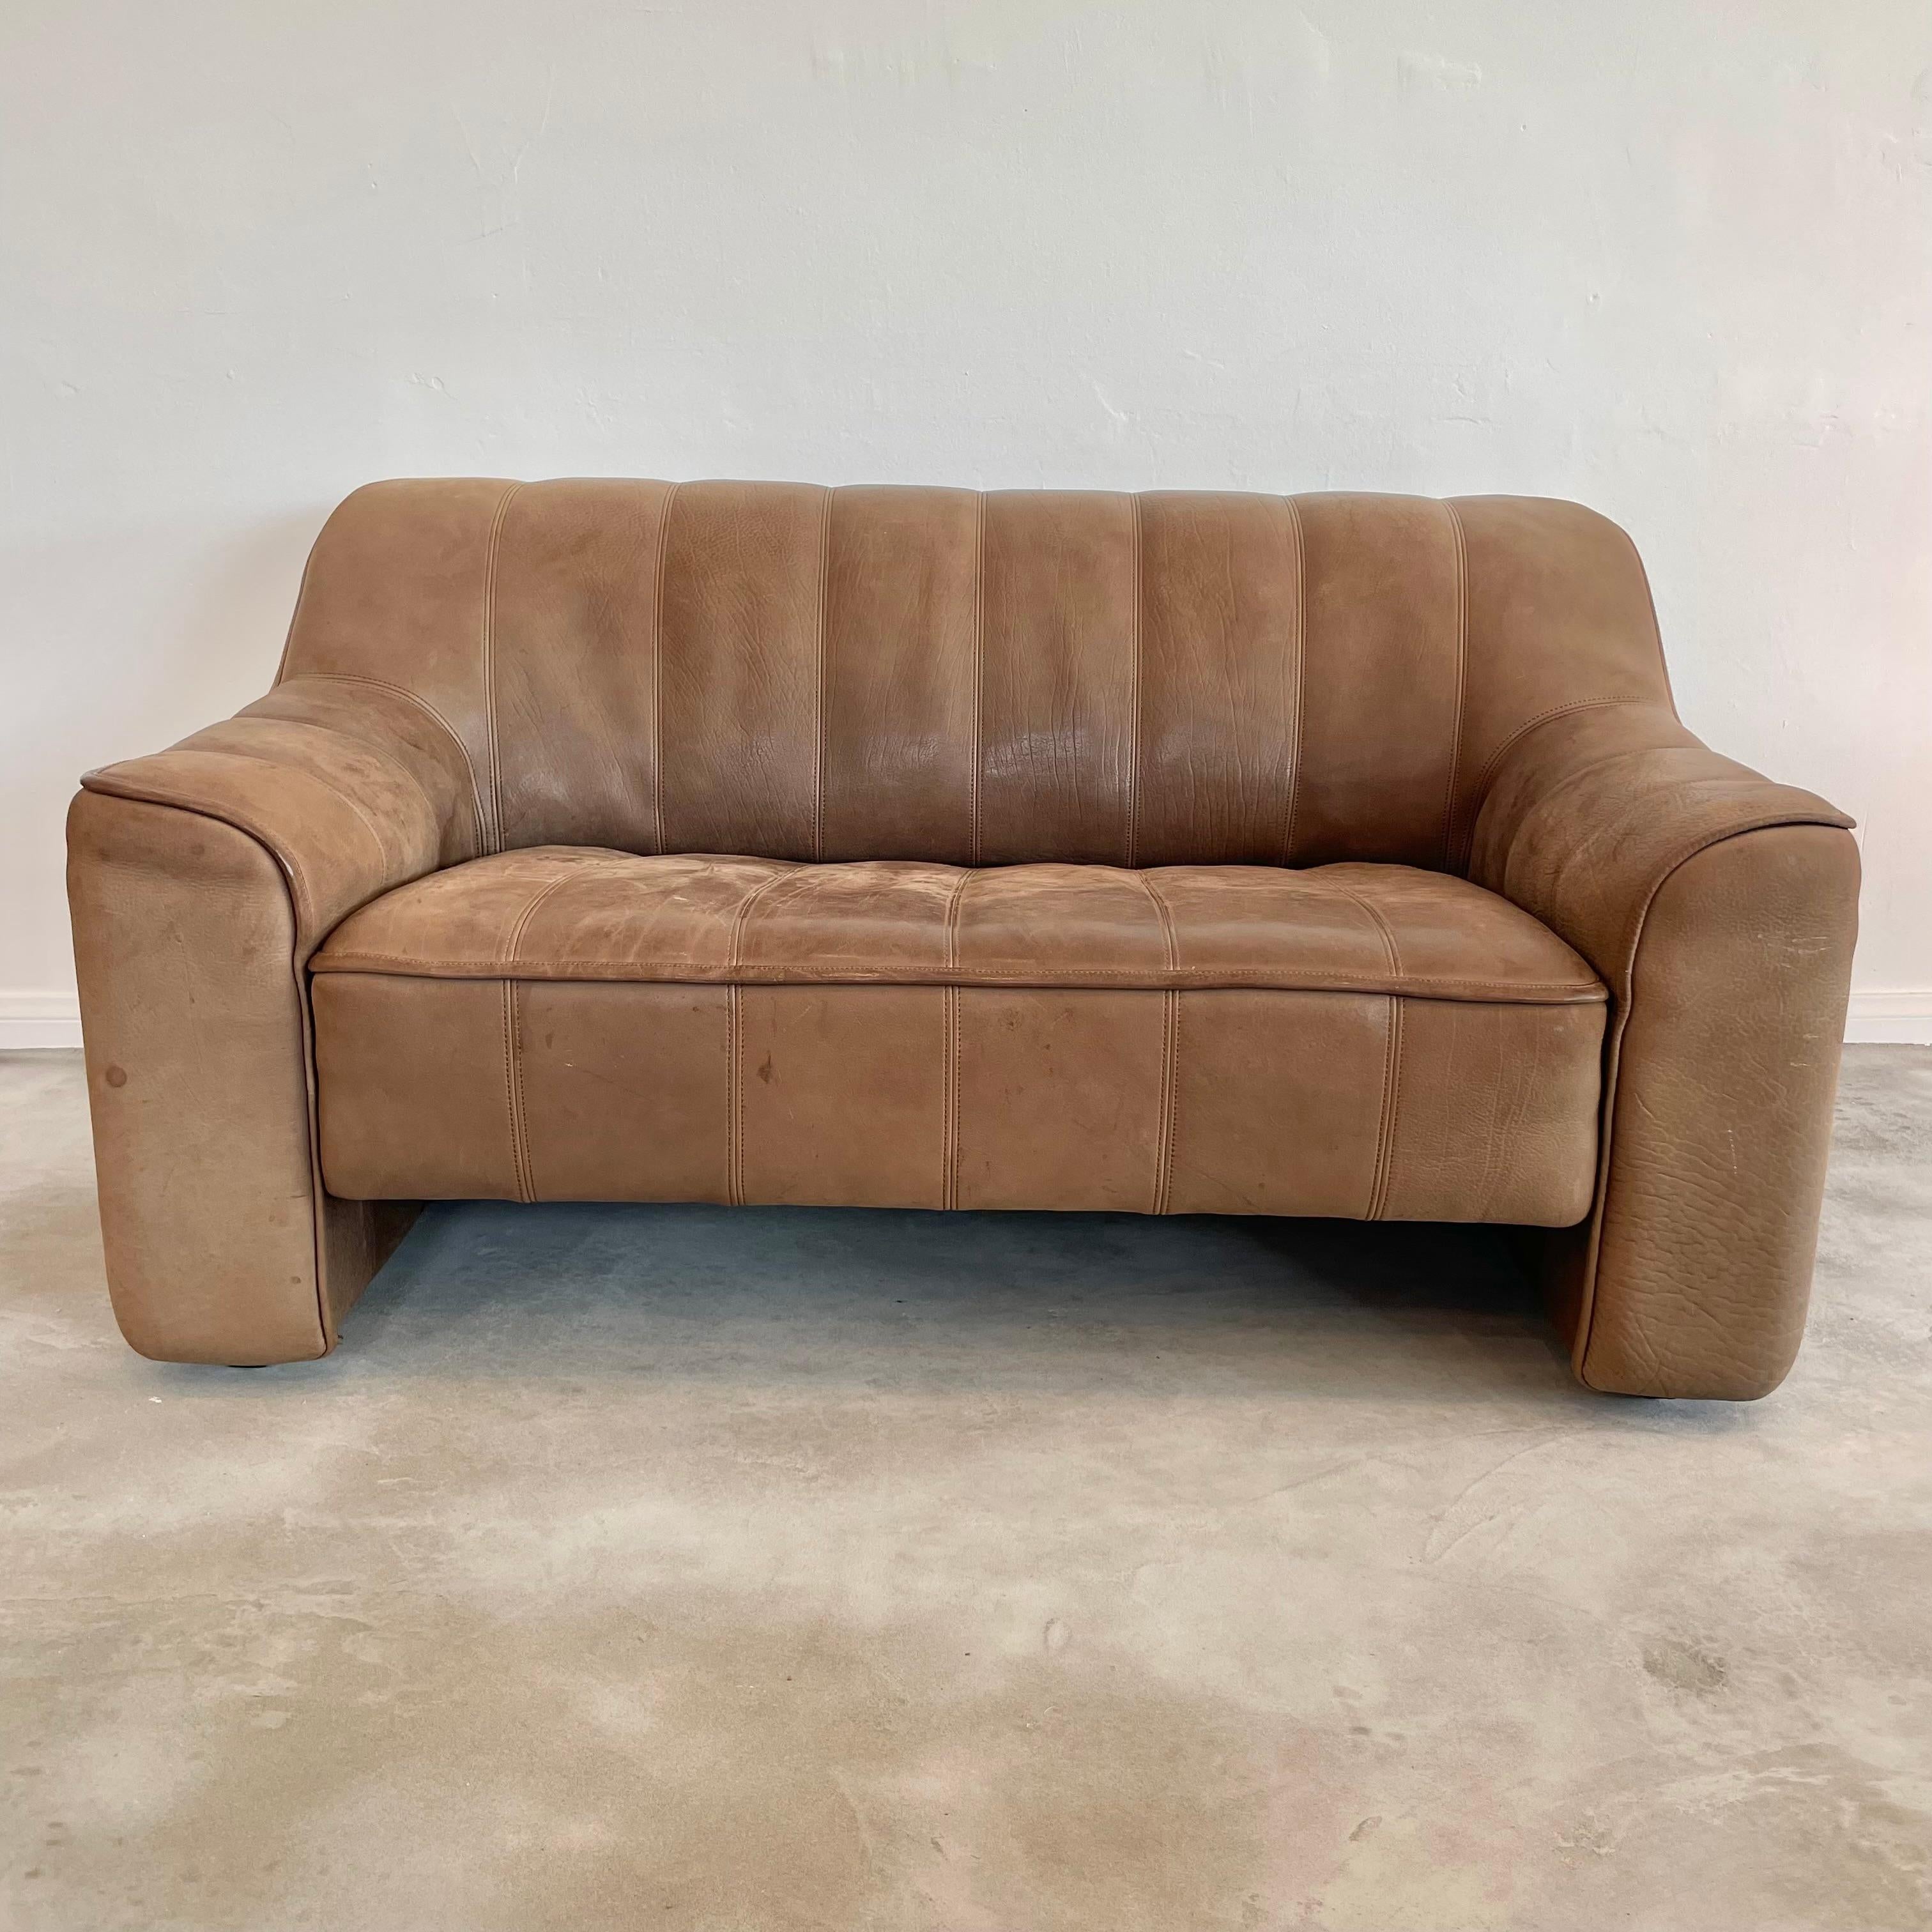 DS 44 2 seat comfort sofa by De Sede in a substantial and supple chocolate brown buffalo leather. Beautiful patina. Leather block style sofa with vertical stitching on seat and seat back. High quality buffalo leather make this sofa a piece that can